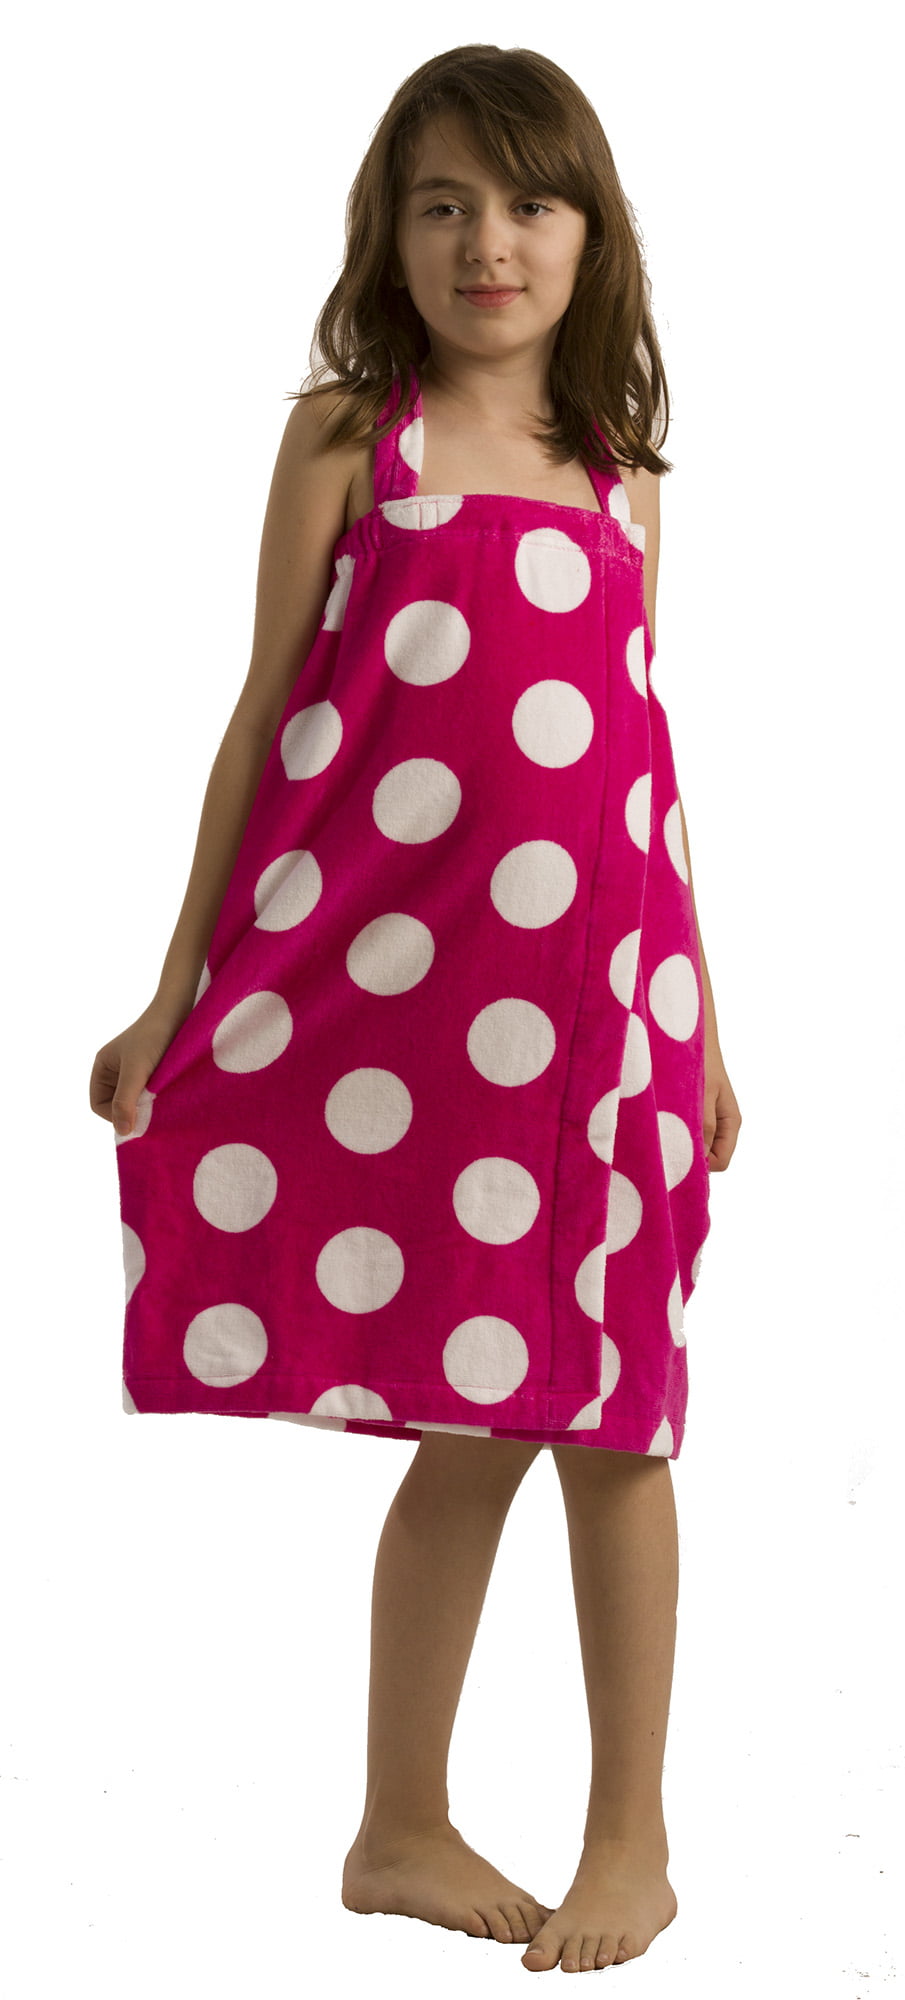 BY LORA Polka Wraps for Girls Bath Wraps Robes Cover up, Hot Pink ...